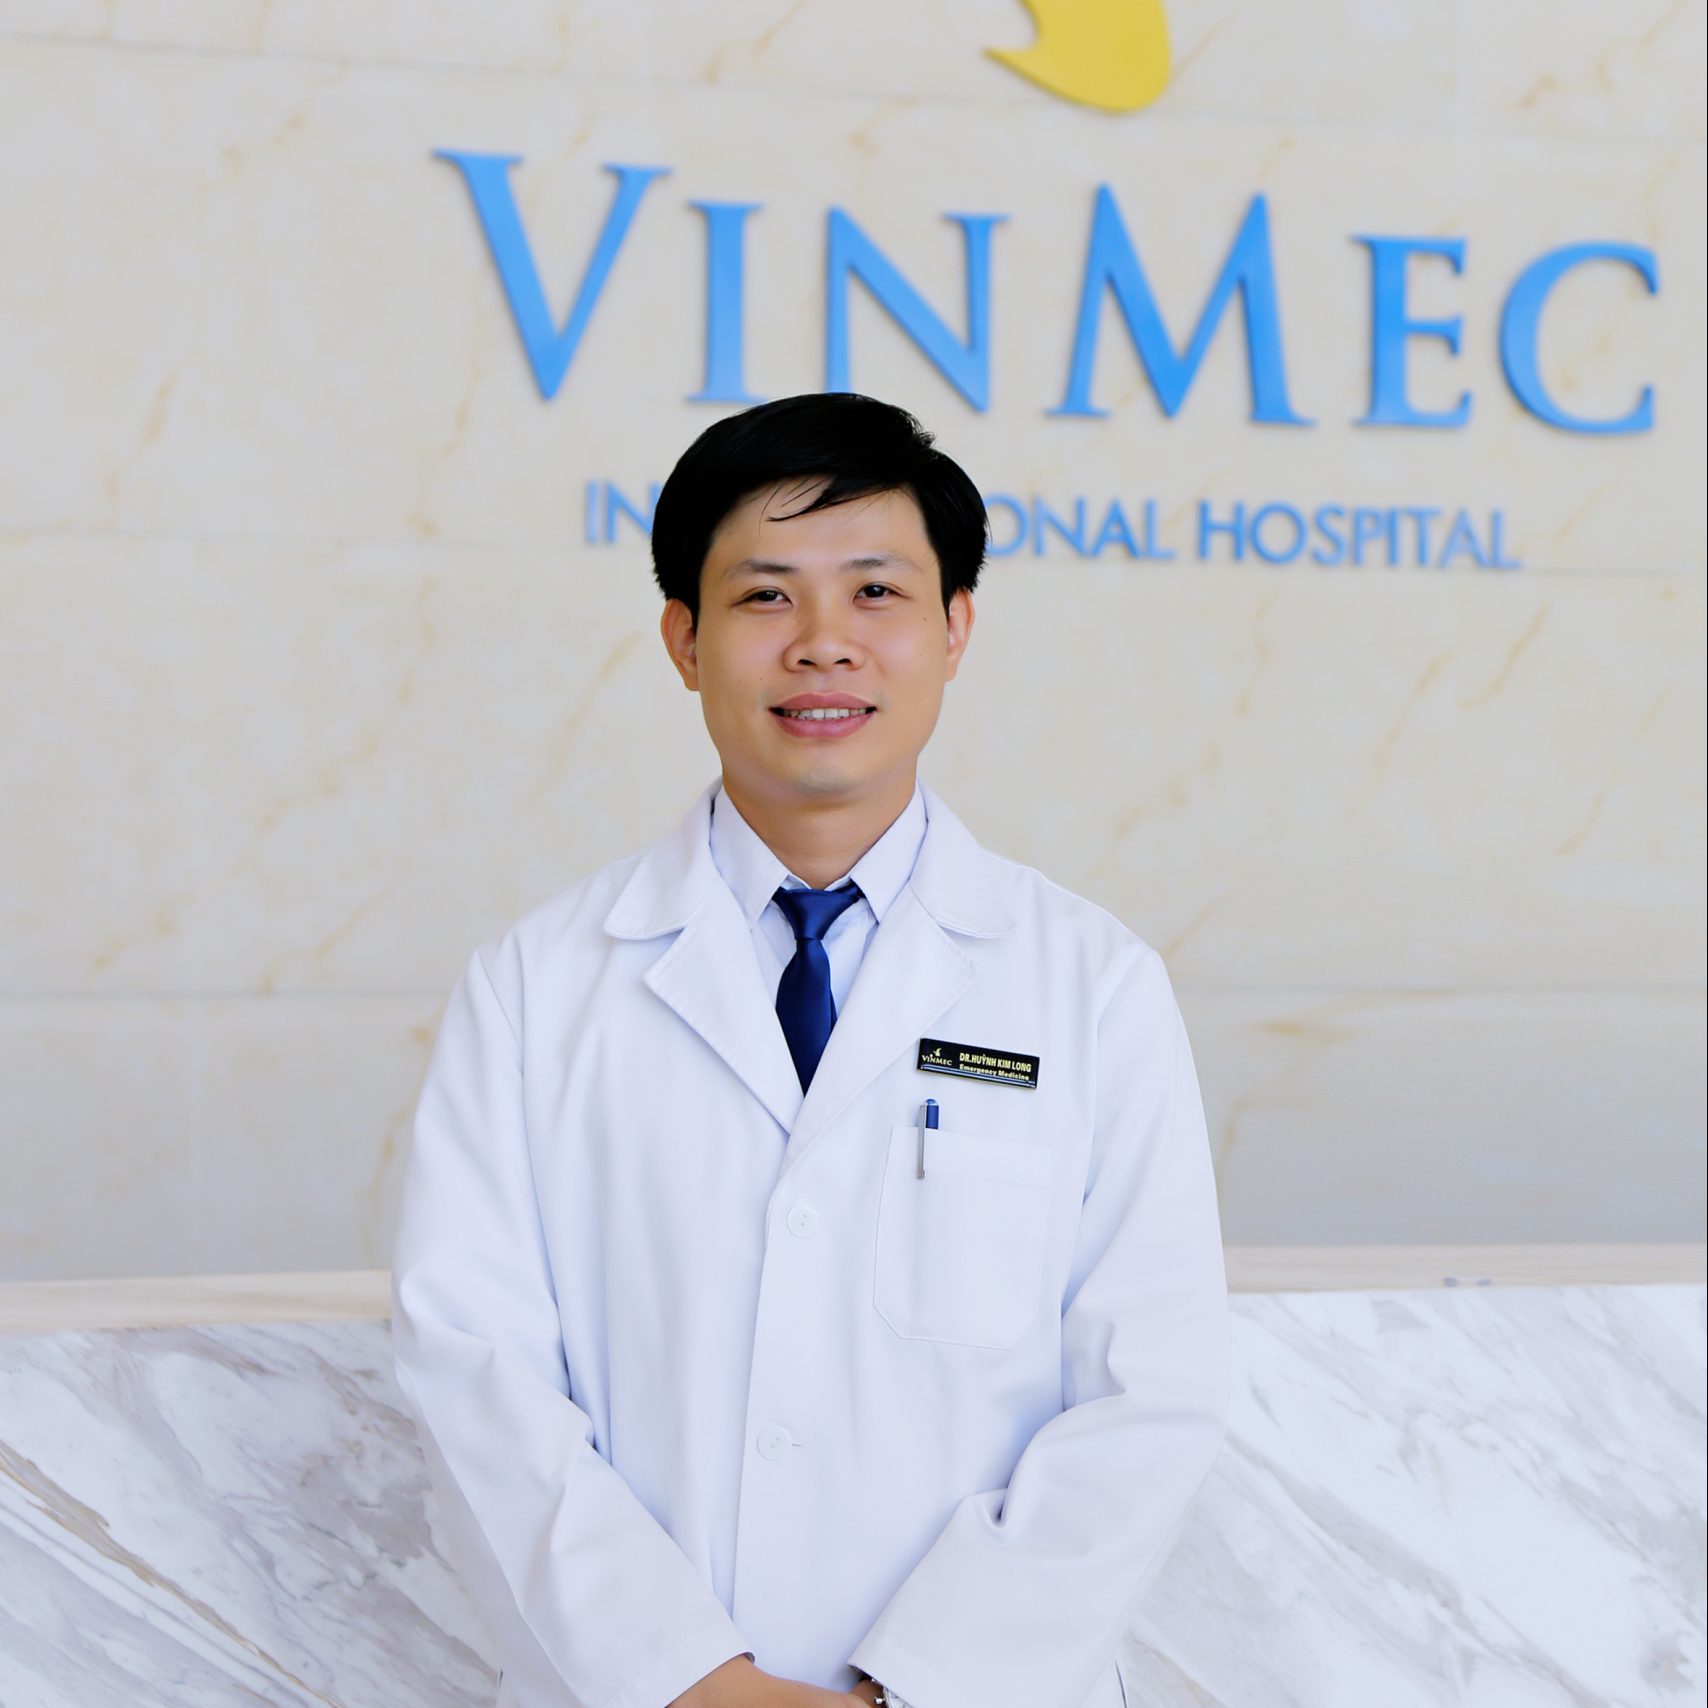  HUYNH KIM LONG, MD - SPECIALIST LEVEL I